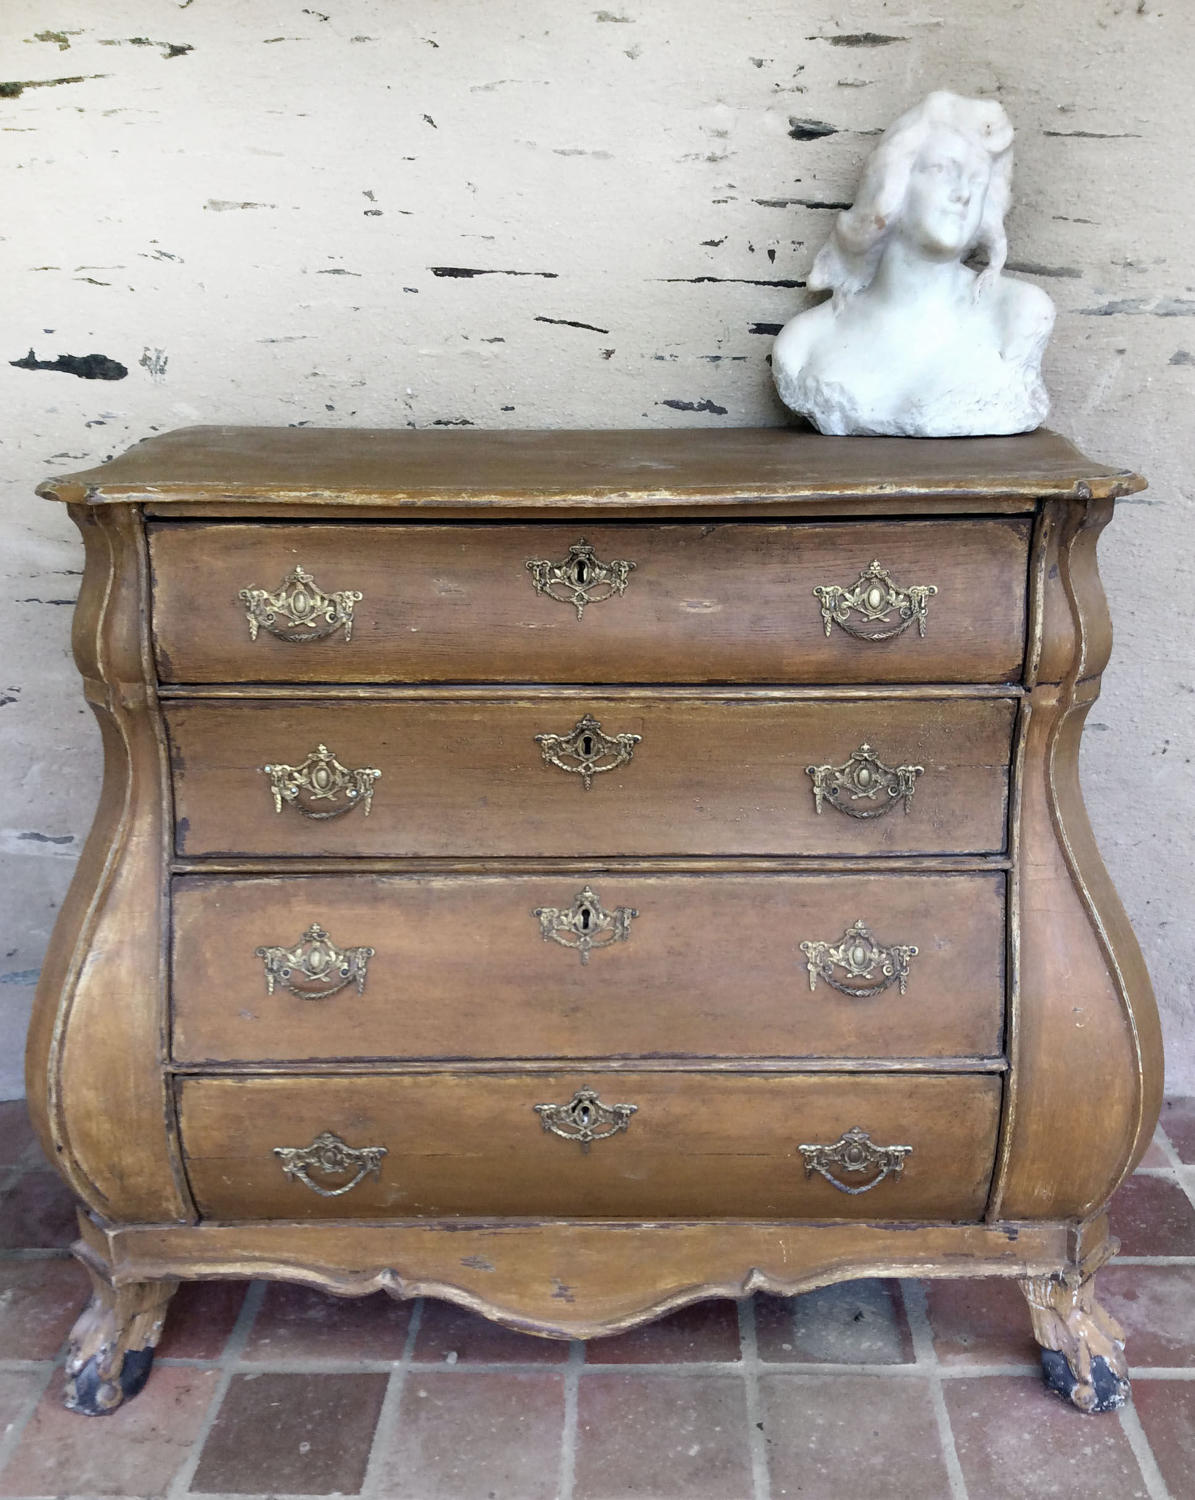 Dutch Mid 18th Century painted Baroque commode c1760-80